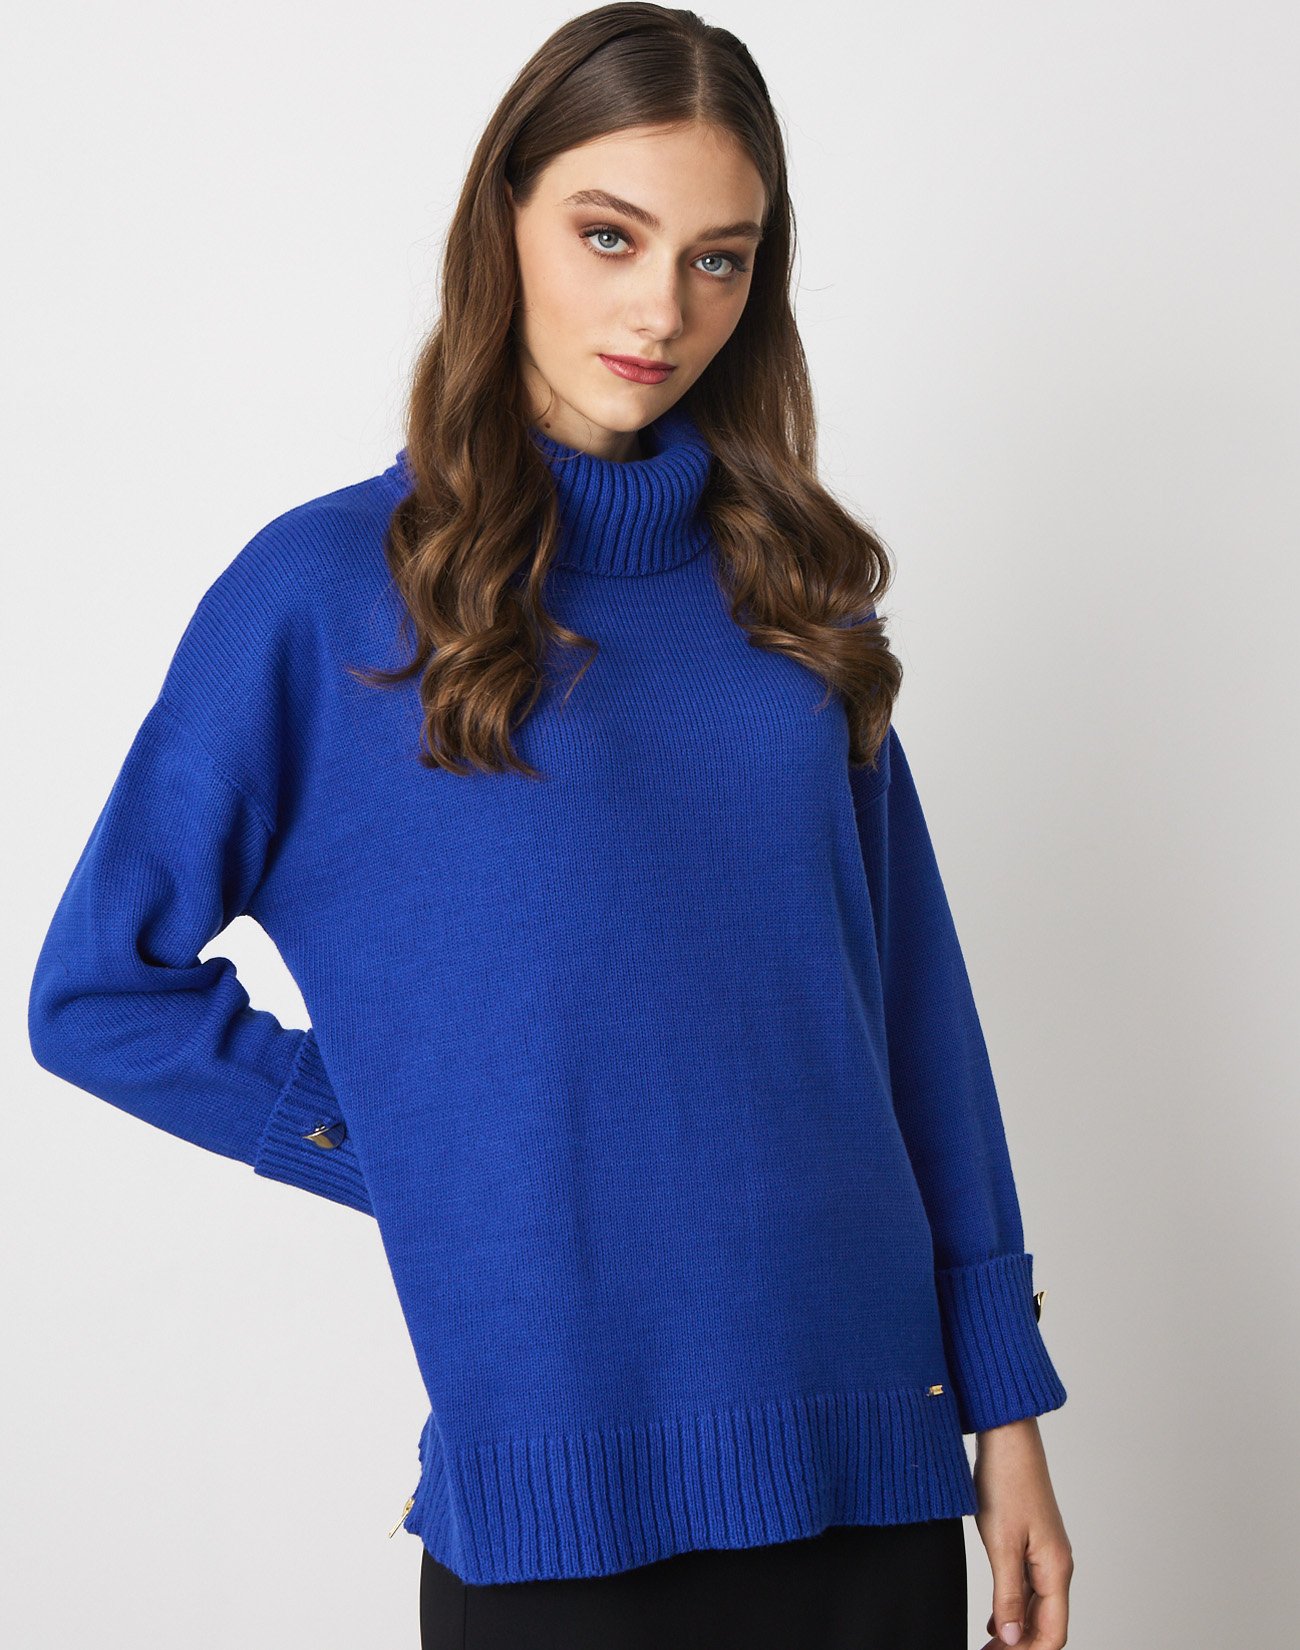 Knit top with zip